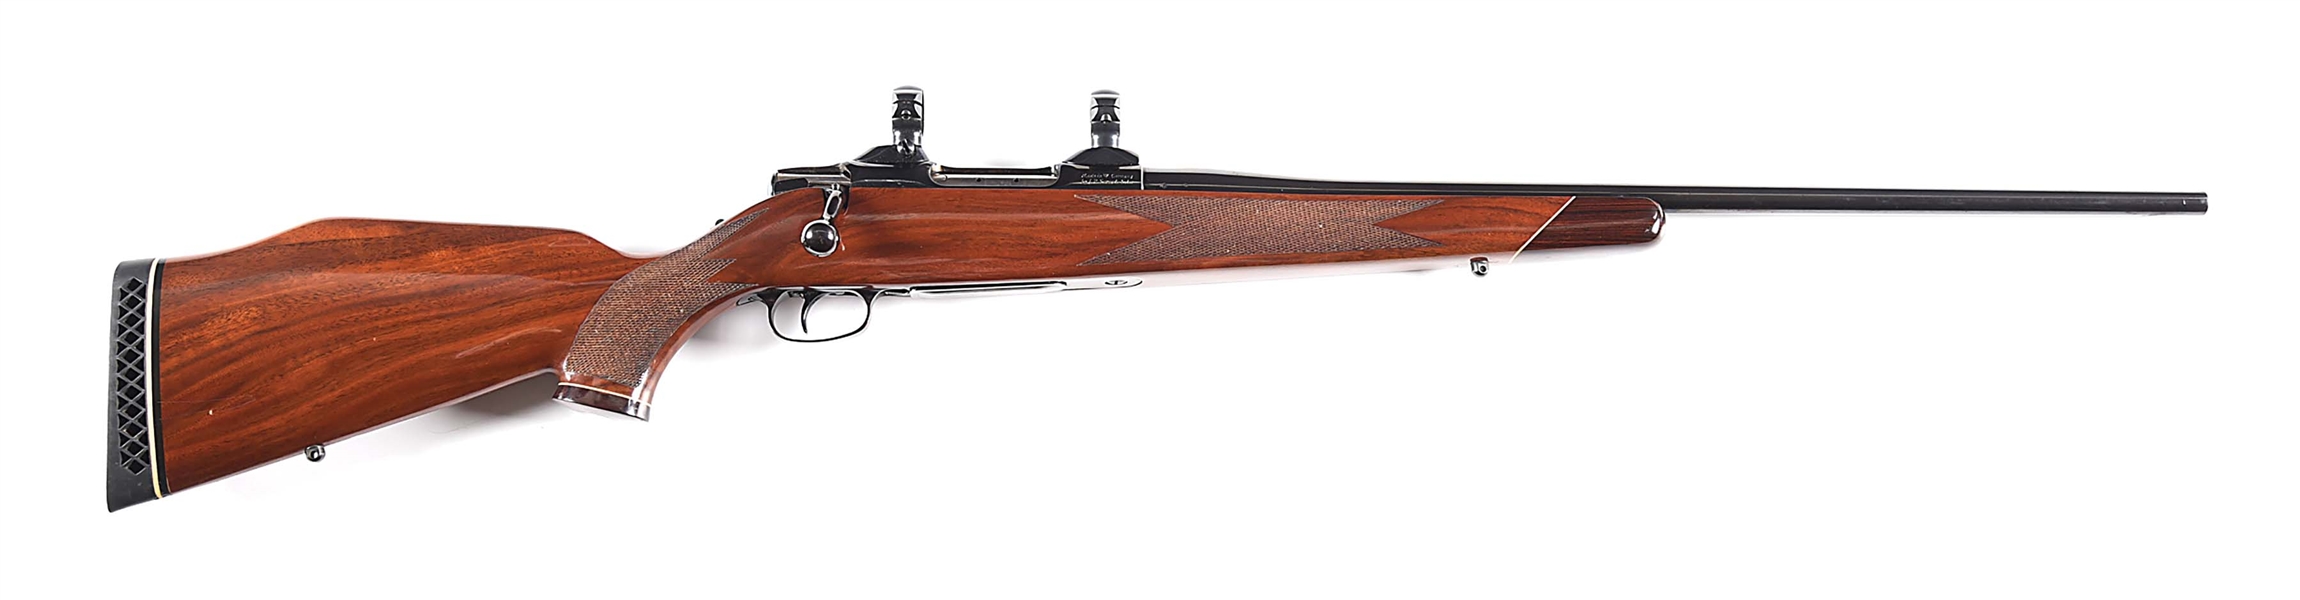 (M) COLT SAUER BOLT ACTION RIFLE IN .243 WINCHESTER.